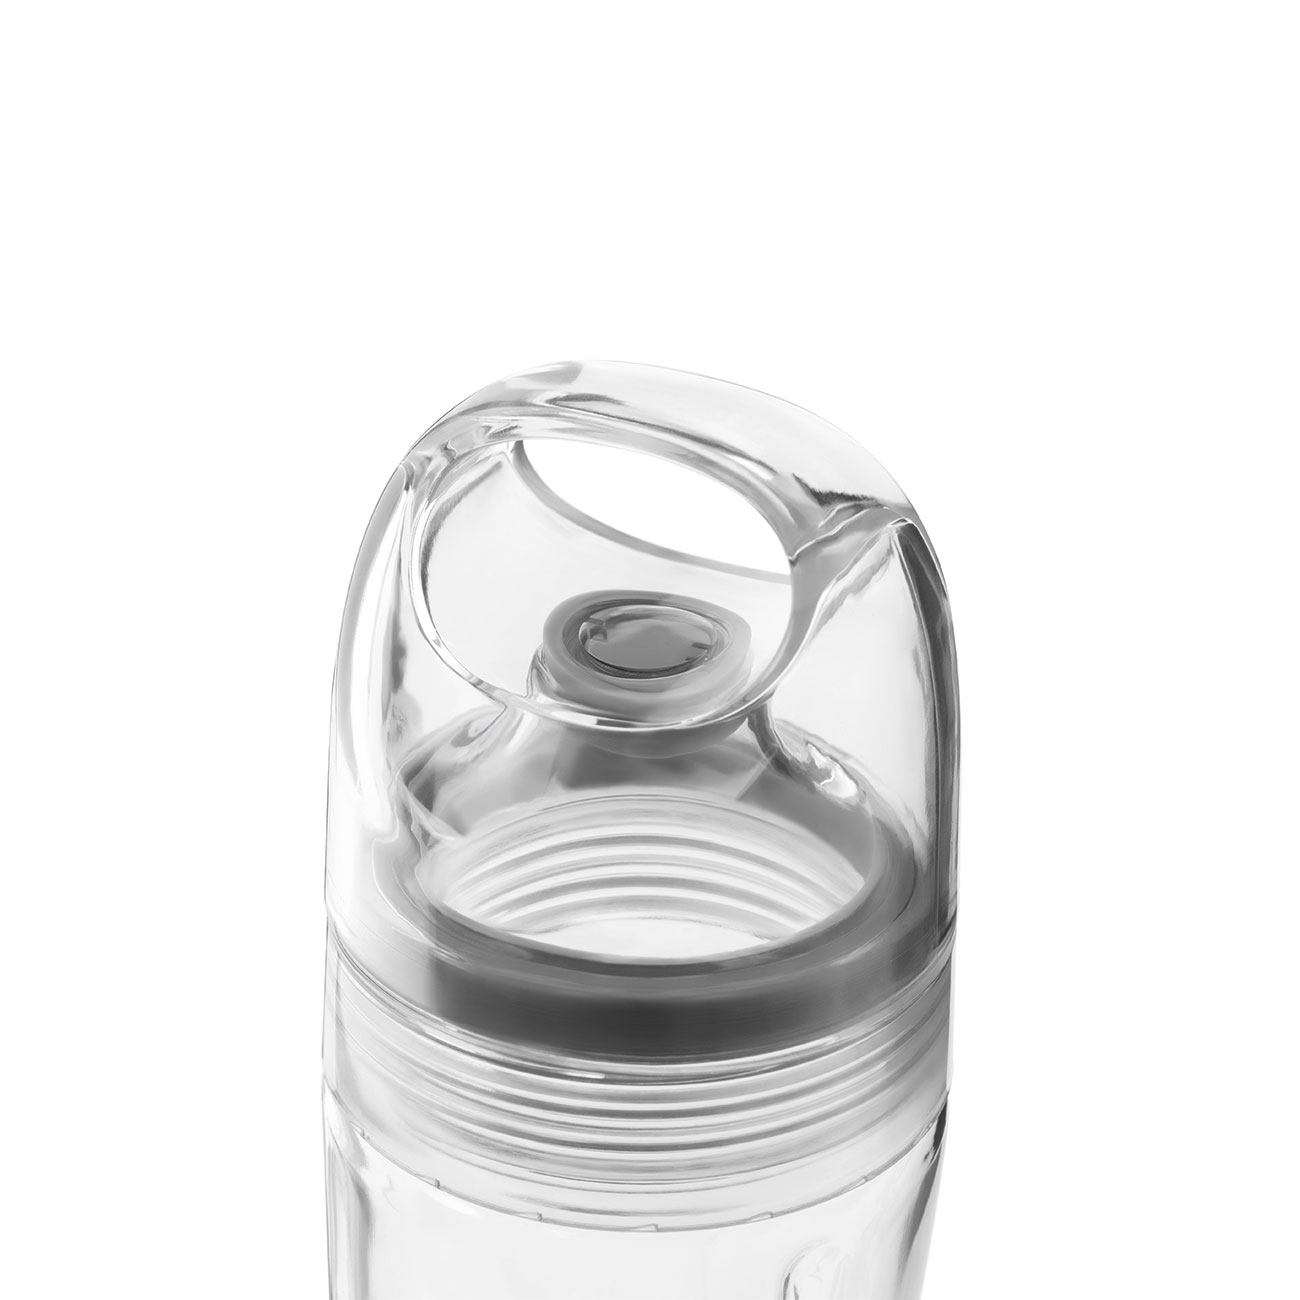 Bottle To Go with blades accessory for Smeg Blender - BGF03_3